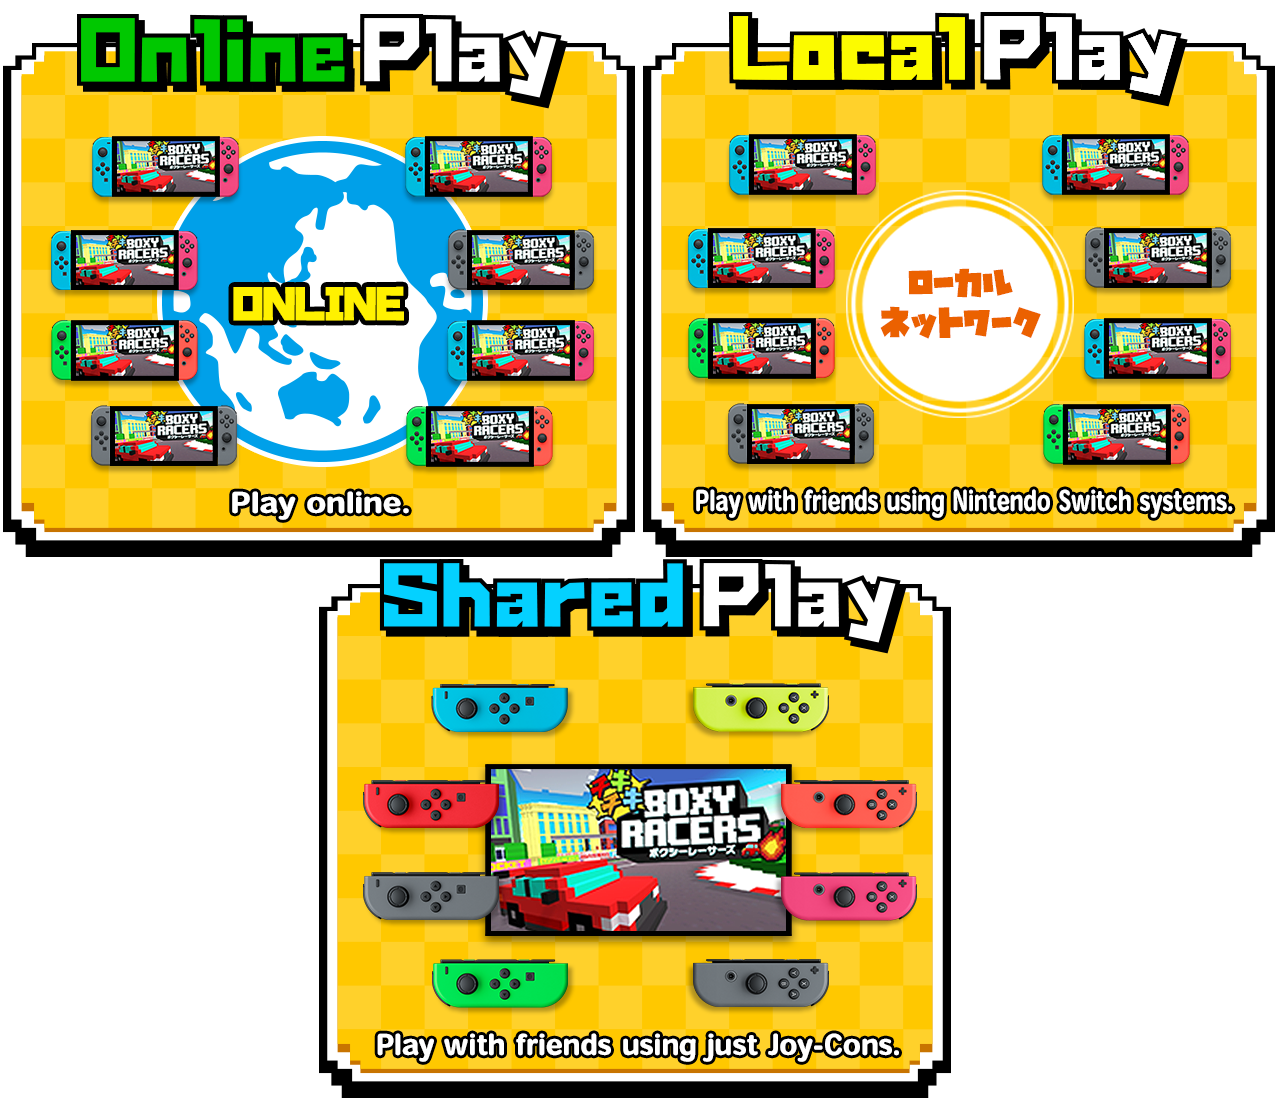 Online Multiplayer for up to 8 players!